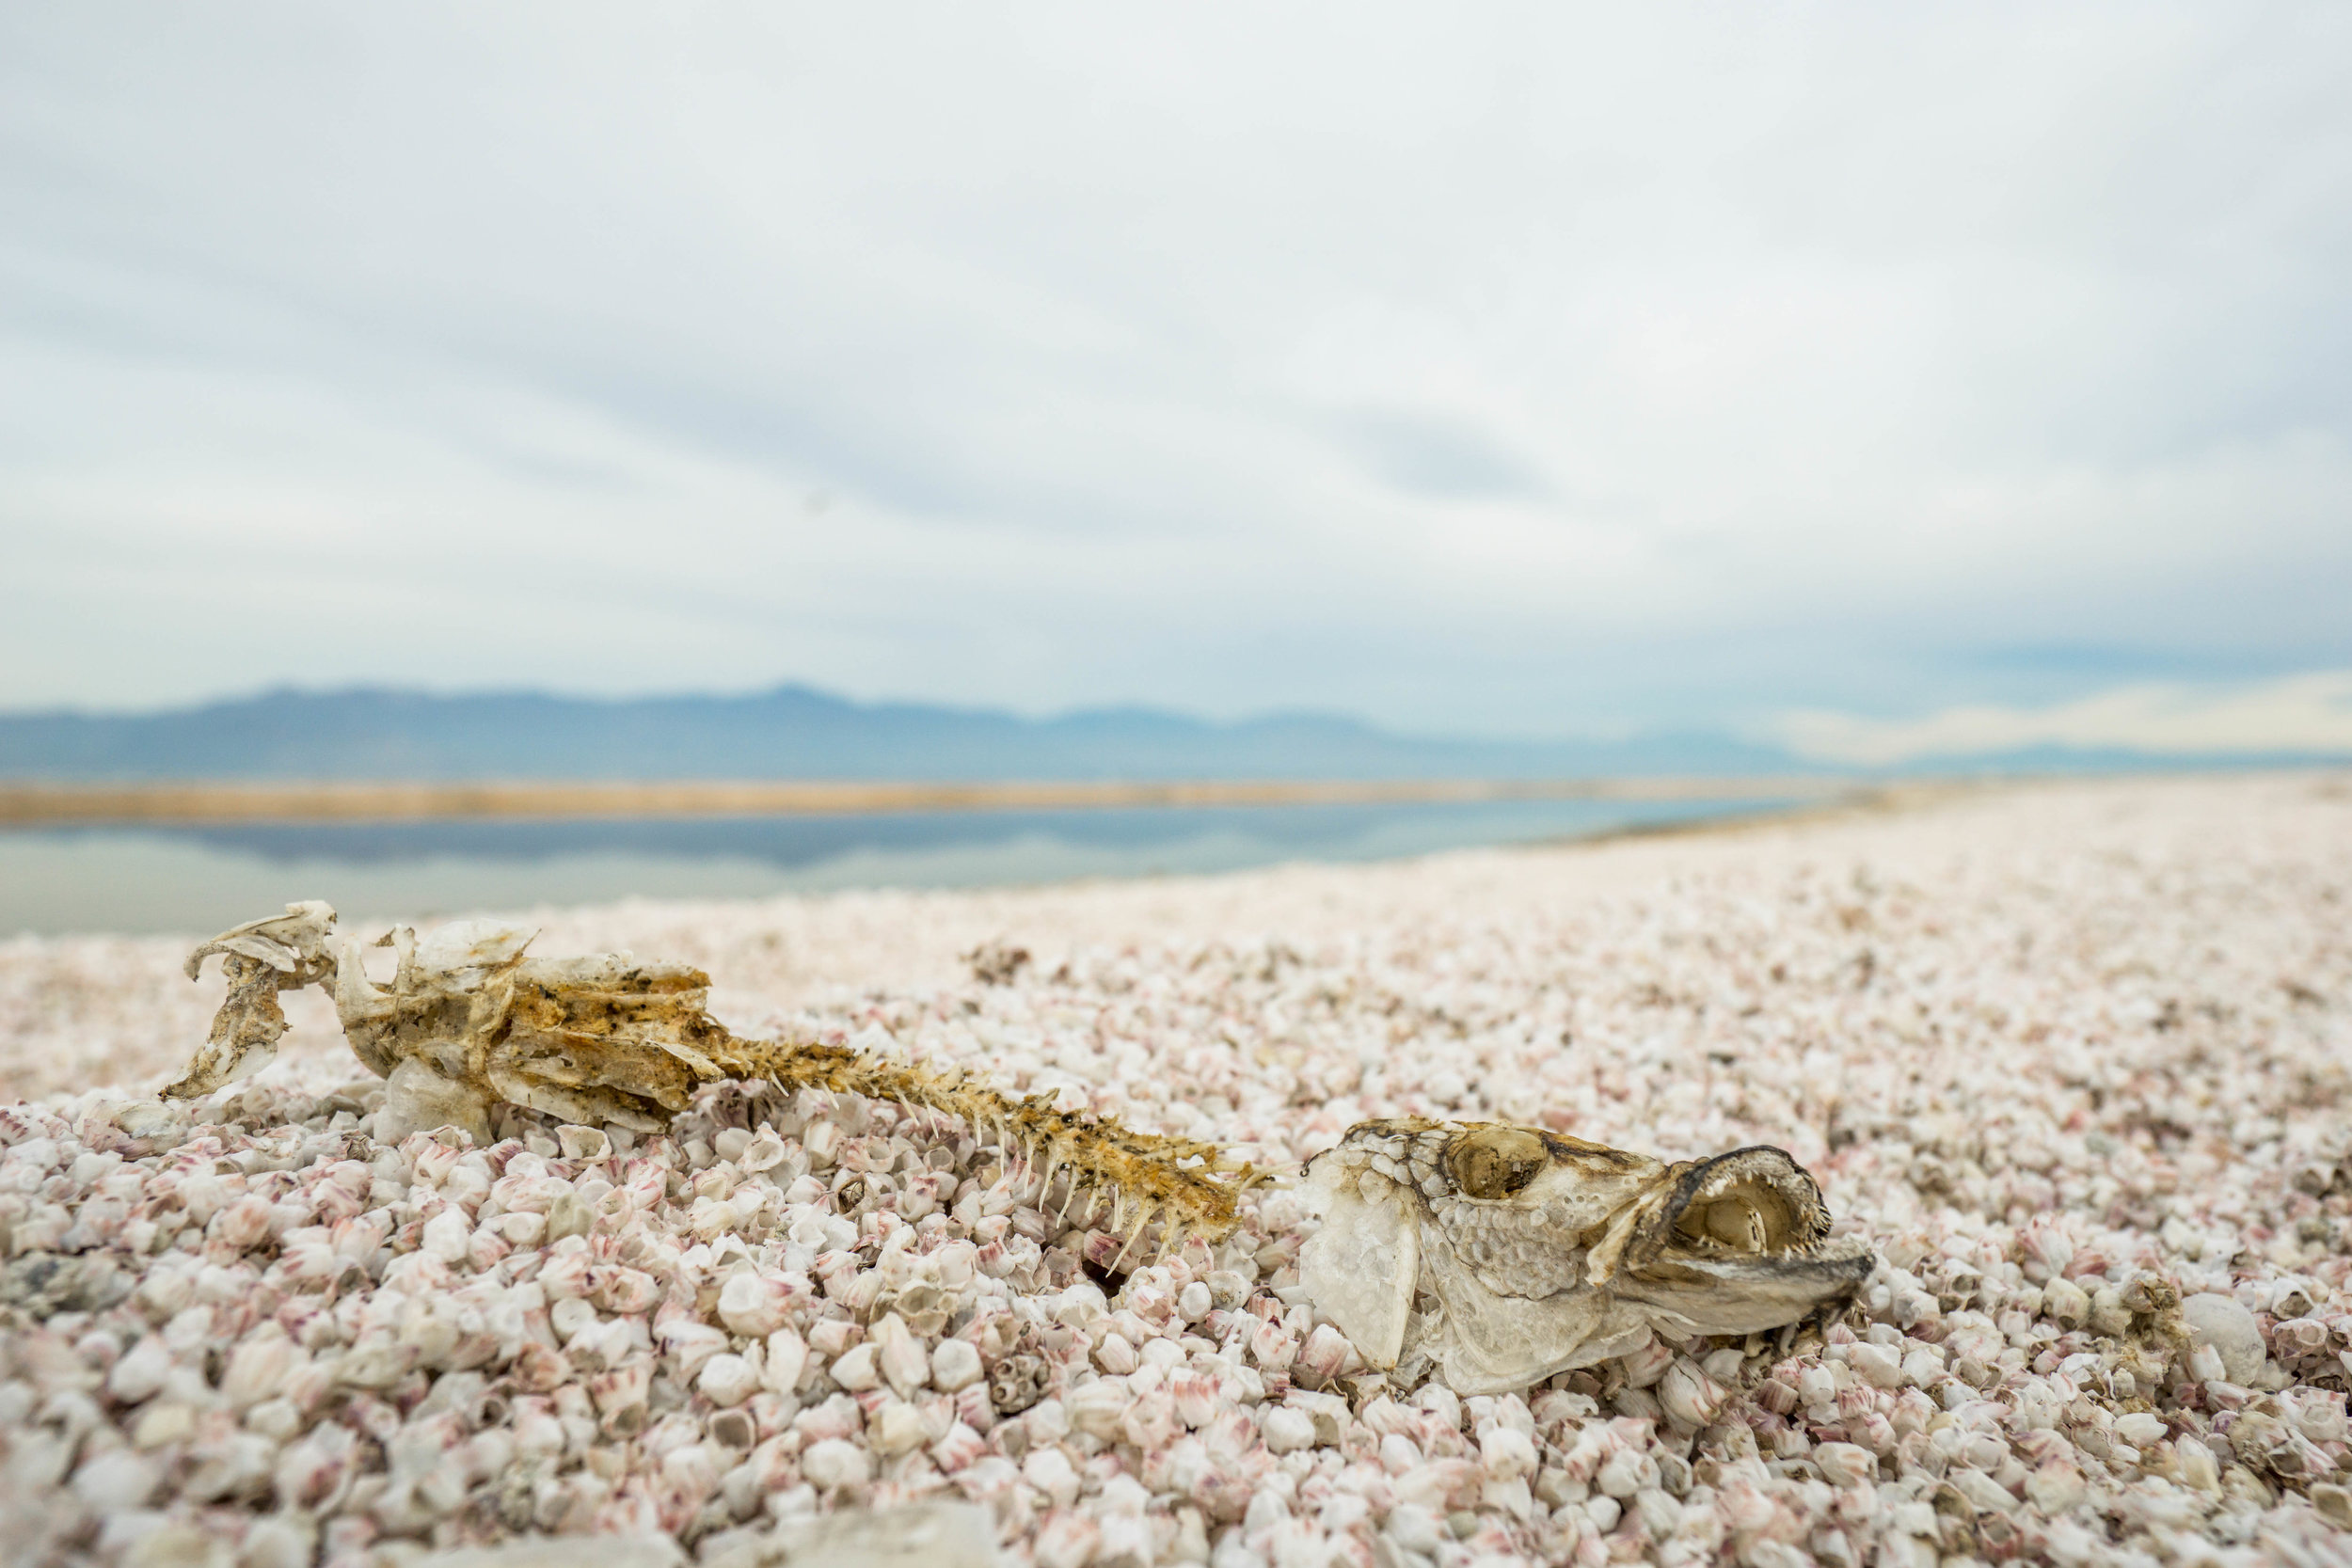 While it looks like sand from afar, the "beaches" around the Salton are actually composed of countless fish bones. Needless to say, the air is filled with an odd smell.